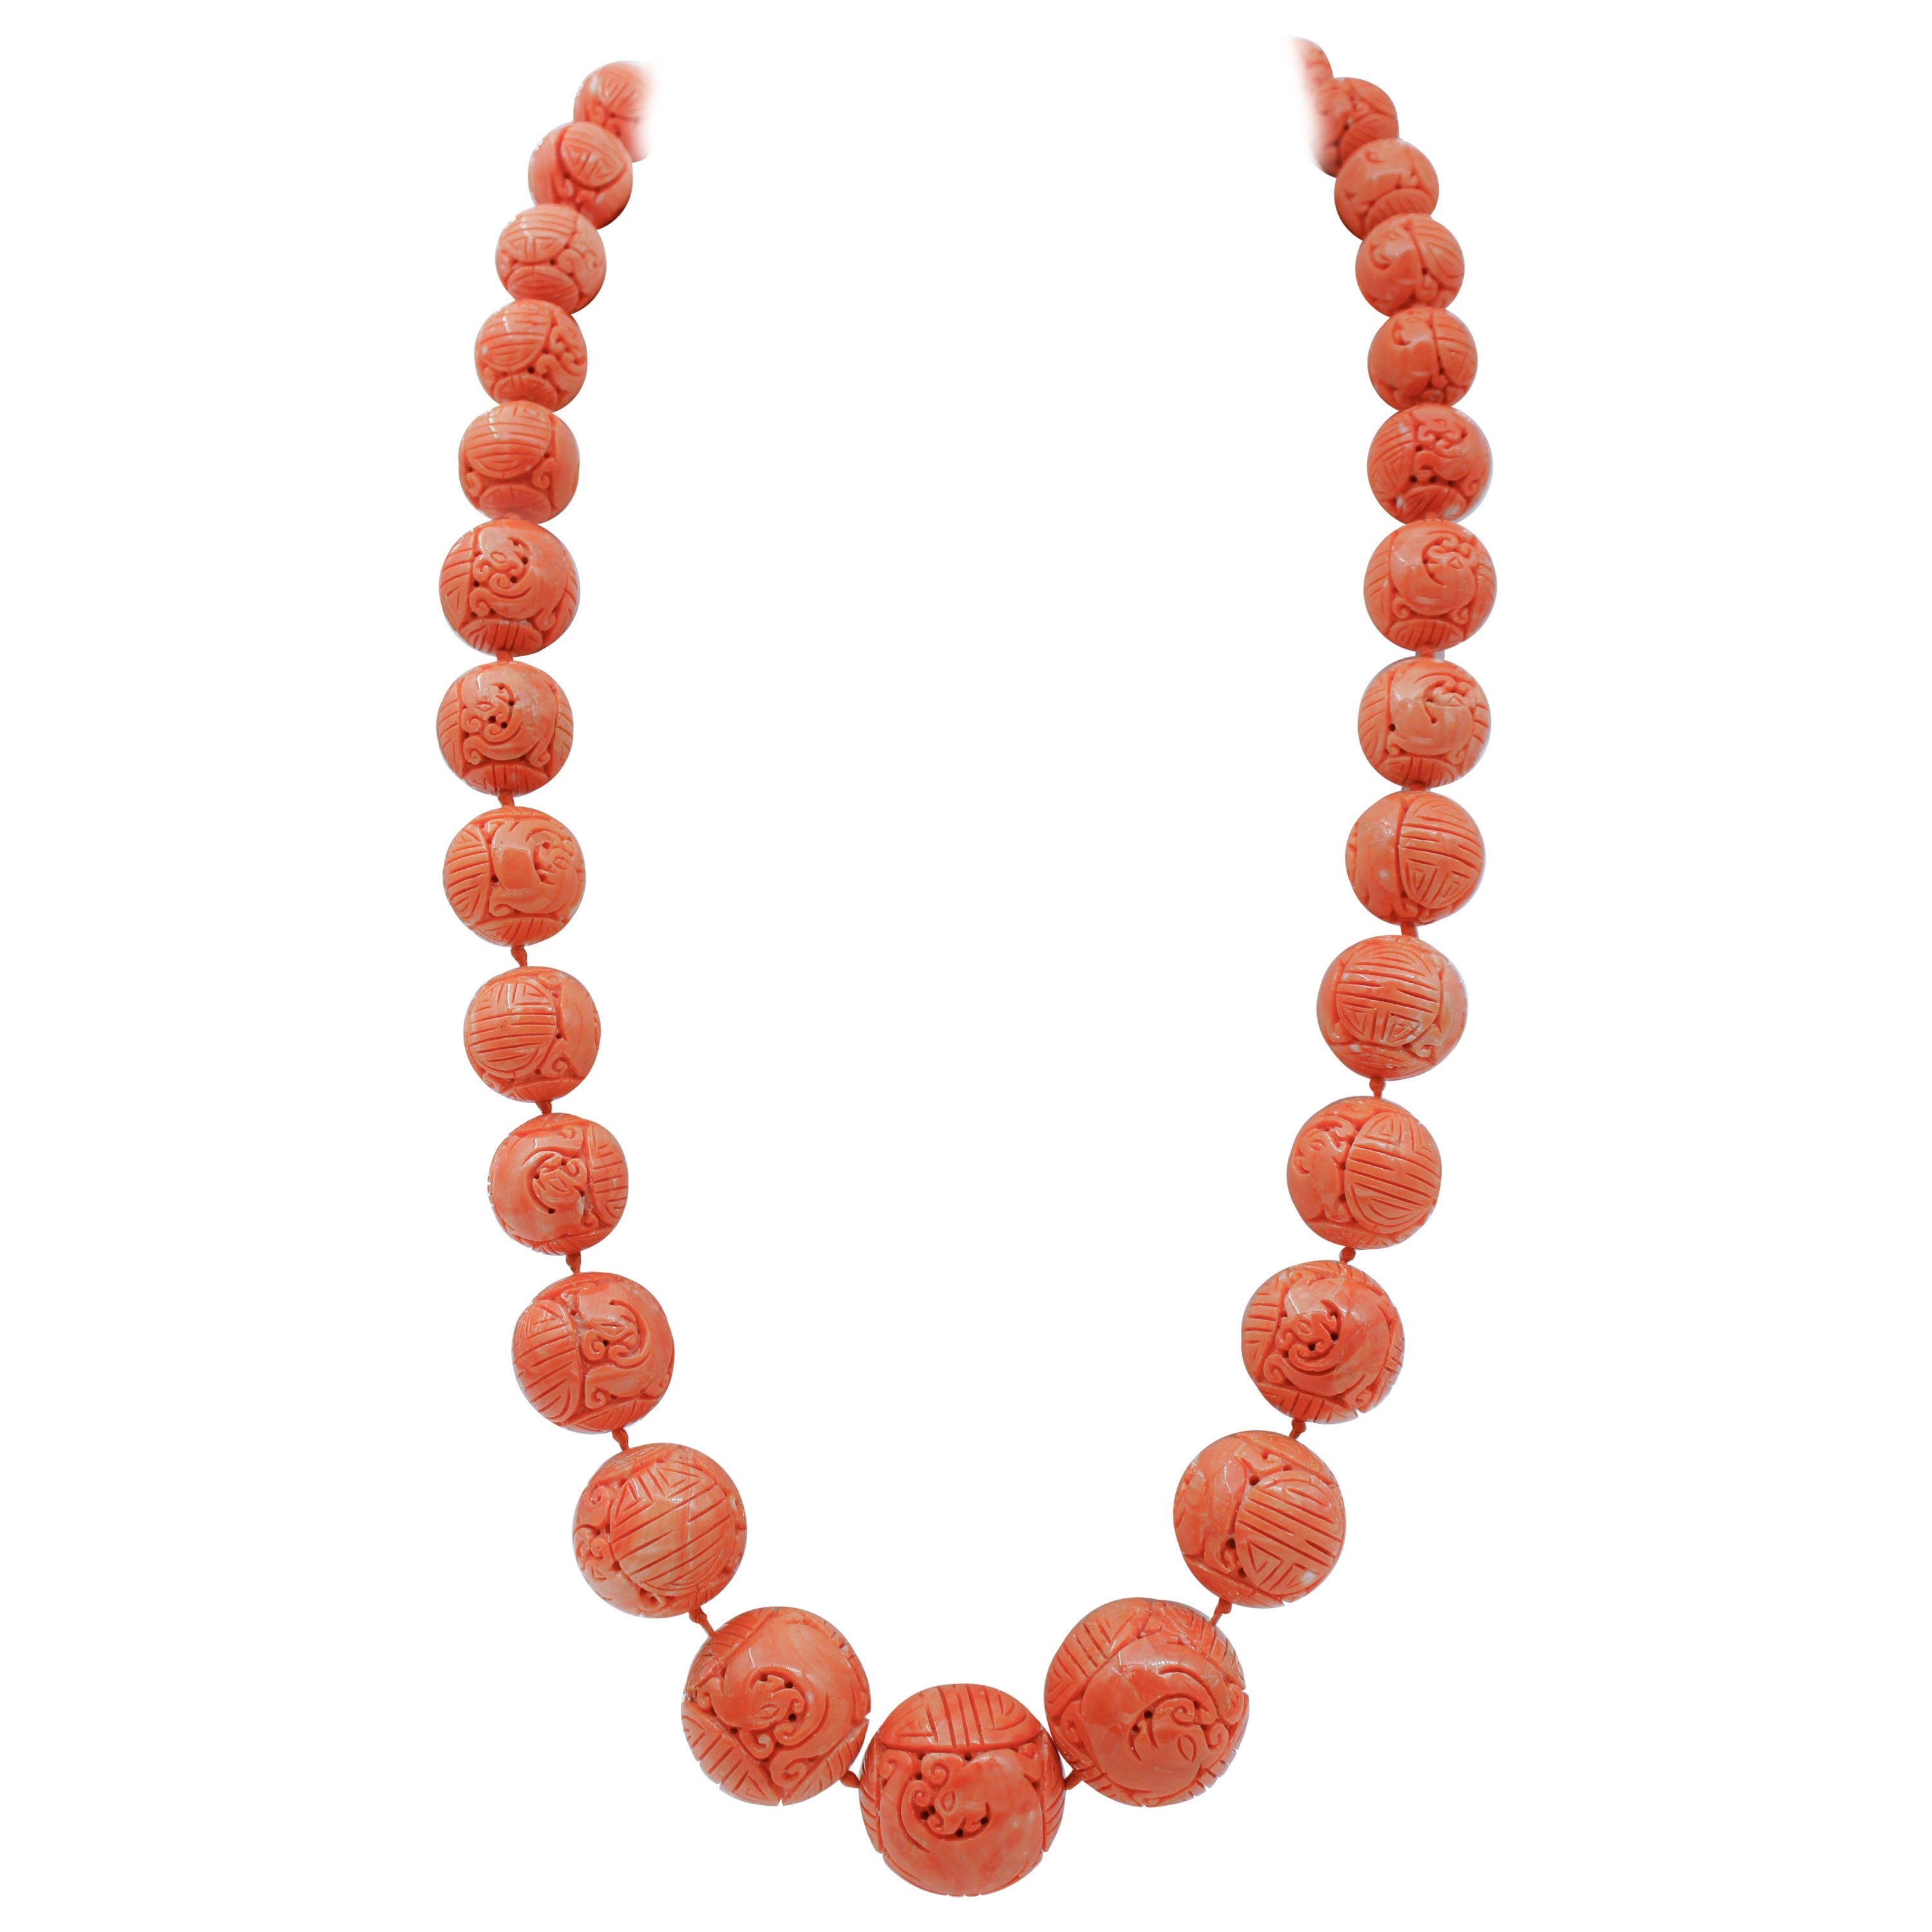 Antique collectible necklace made with large engraved coral spheres For Sale